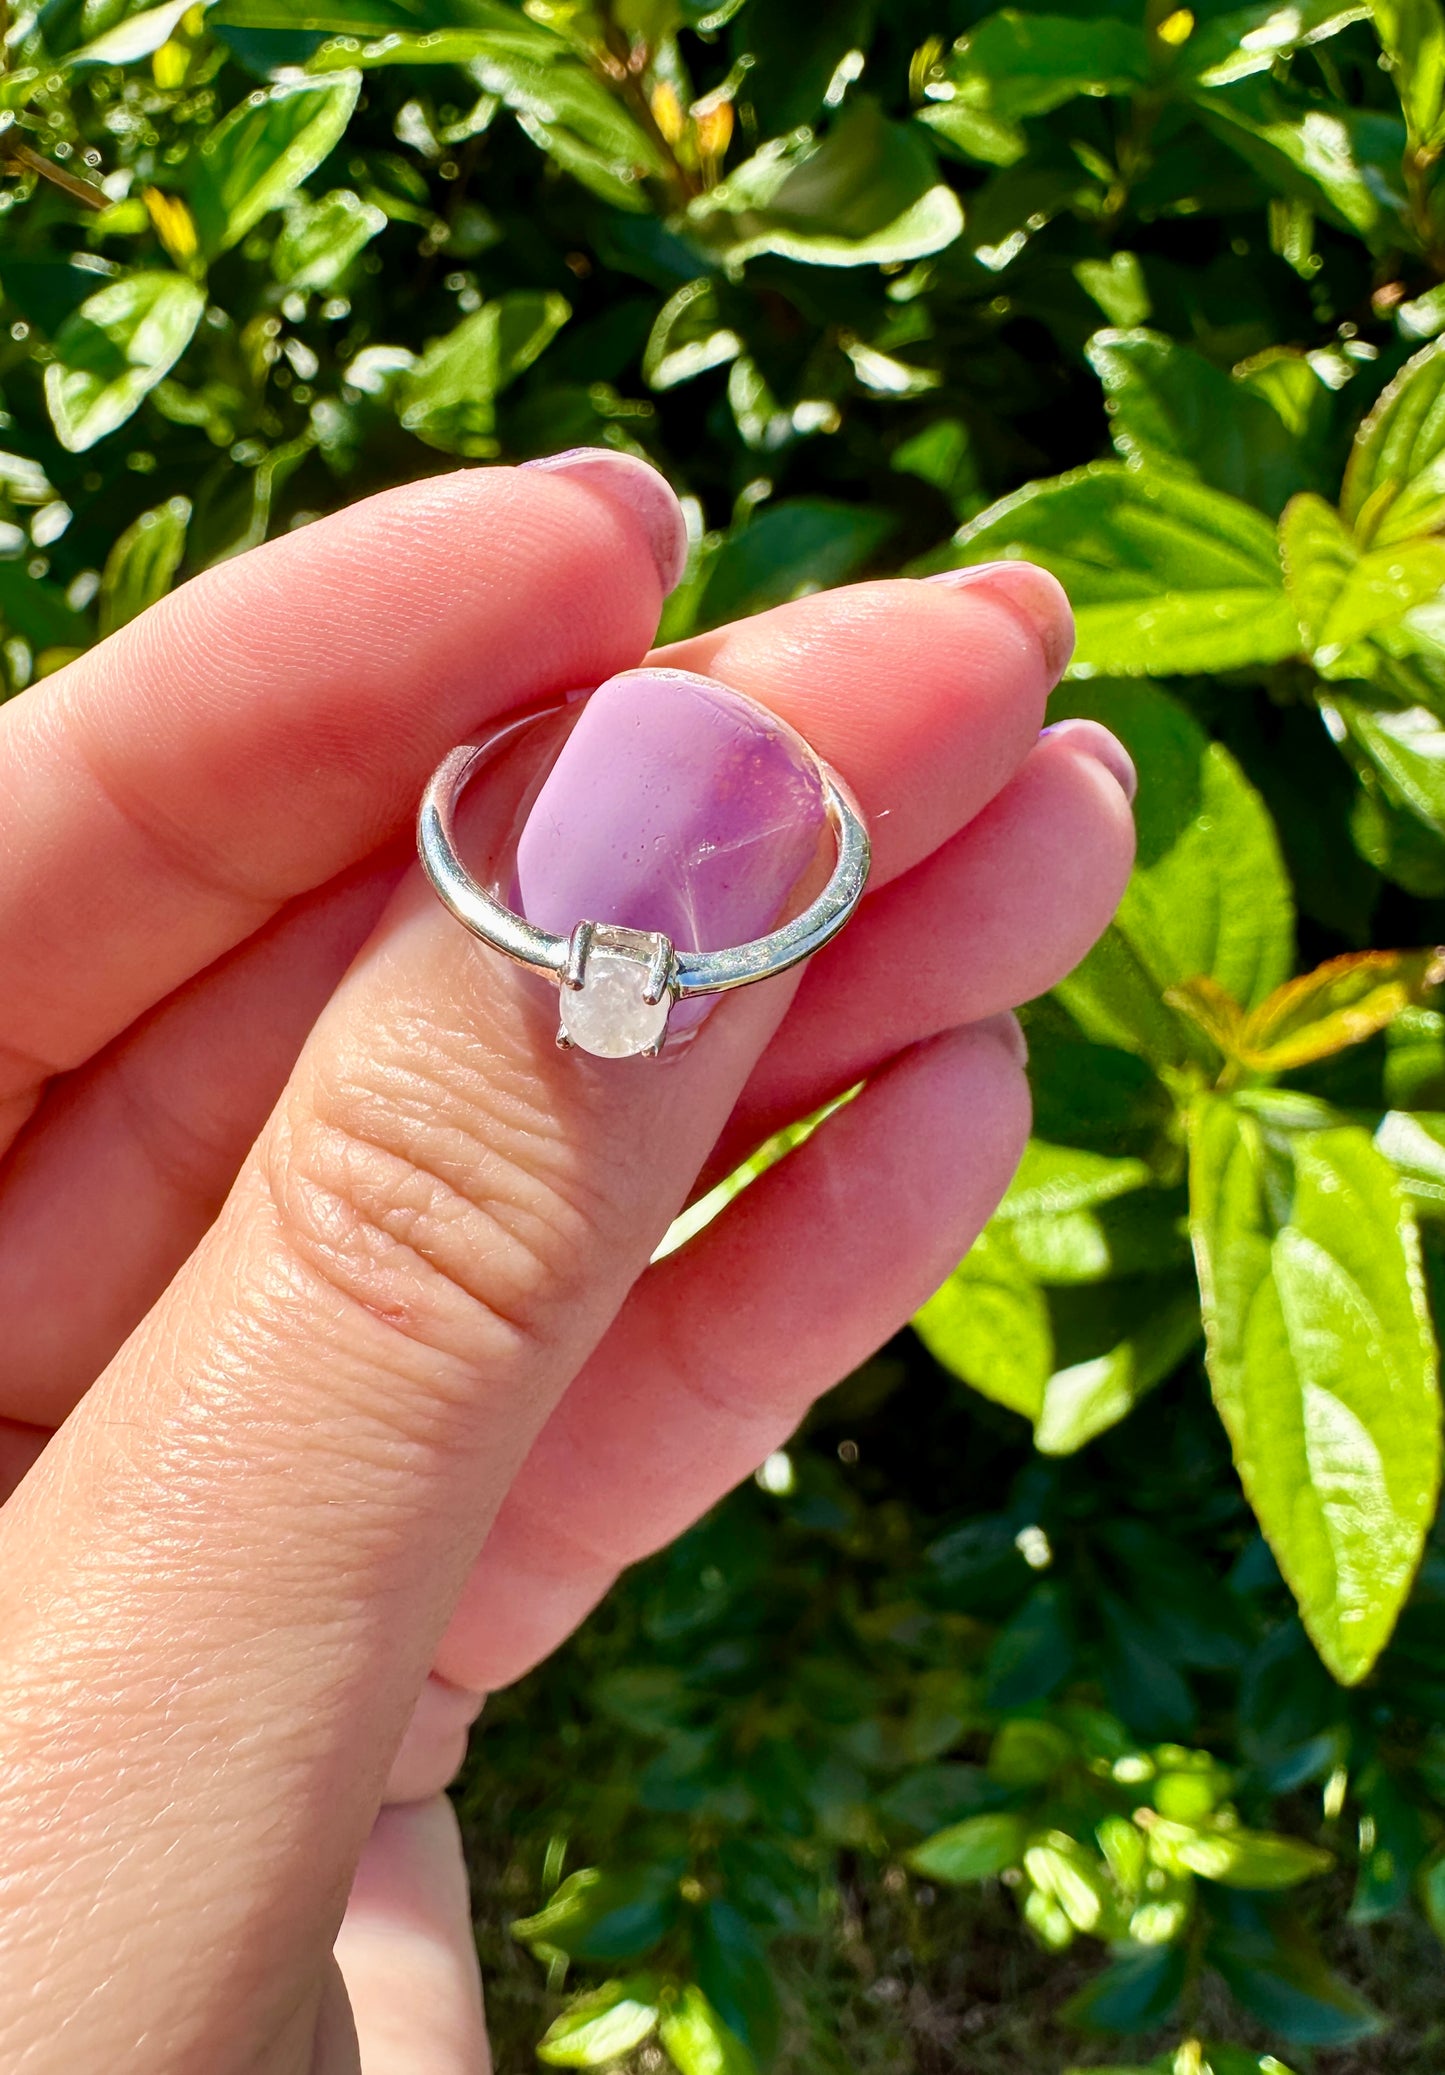 Sterling Silver Moonstone Ring Size 6, Captivating Handcrafted Gemstone Jewelry, Mystical Lunar Inspired Accessory, Unique Gift Idea